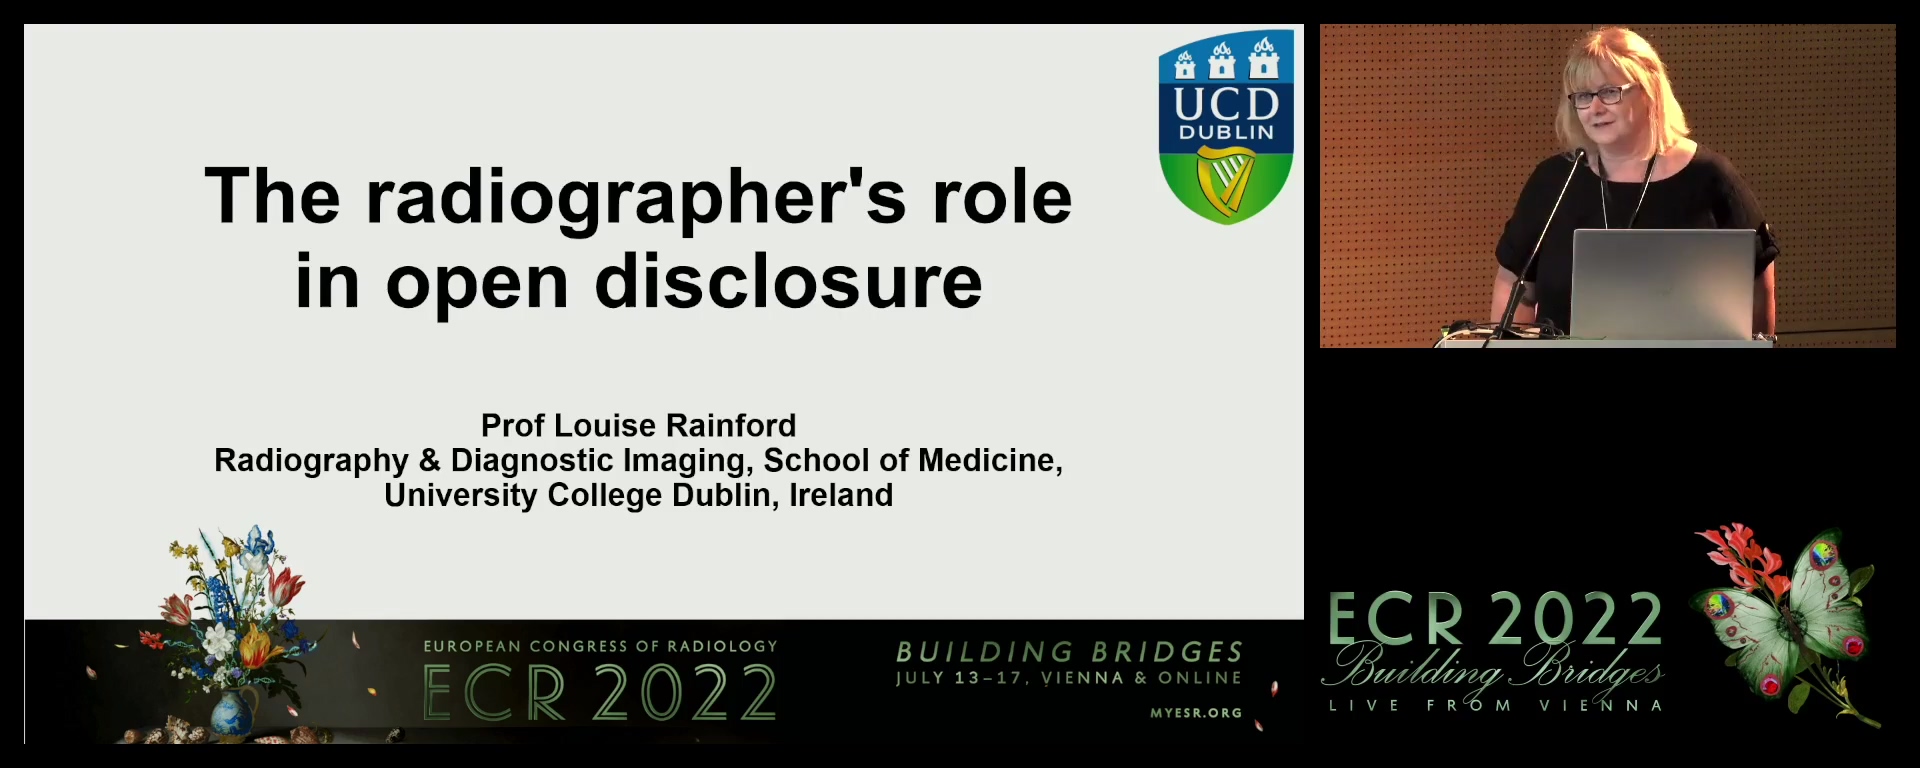 The radiographer's role in open disclosure - Louise A. Rainford, Dublin / IE